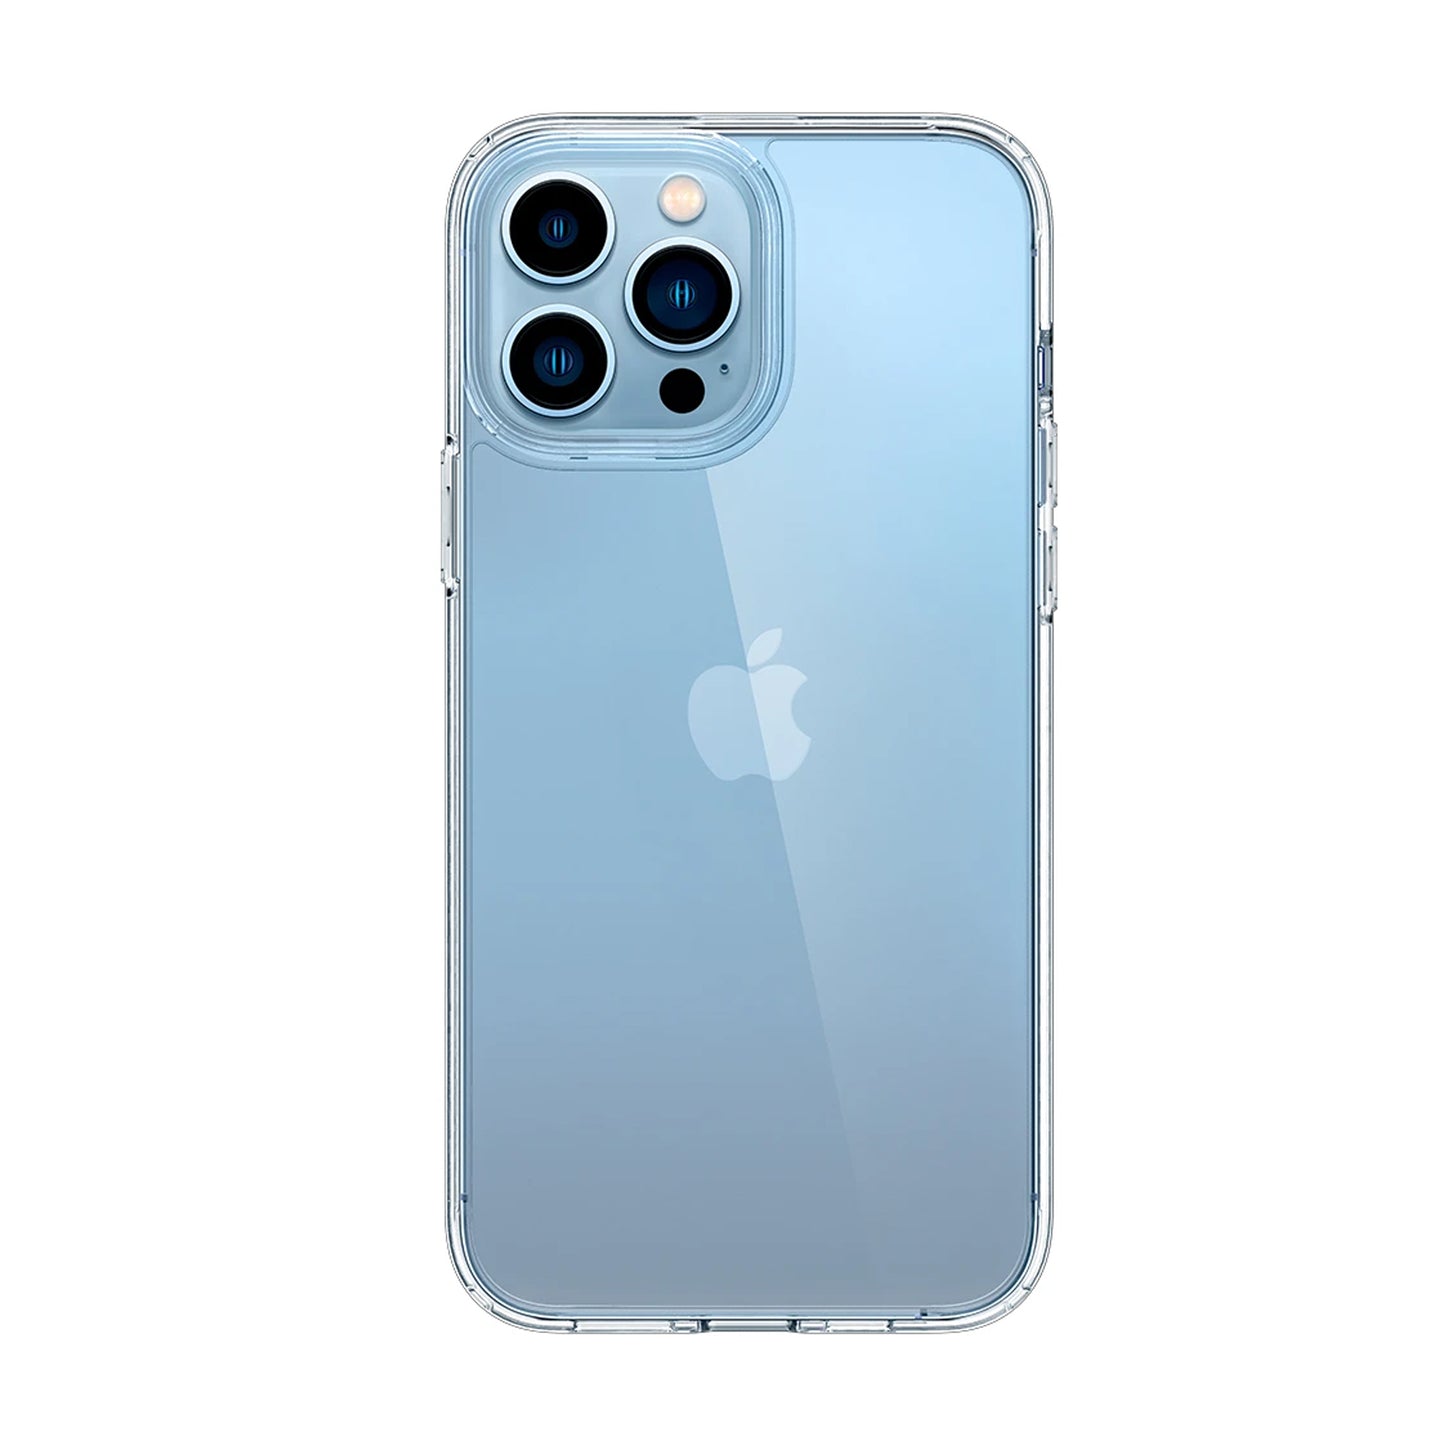 Spigen Crystal Hybrid for iPhone 13 Pro Max 6.7" 5G - Crystal Clear (Barcode: 8809756649899 )